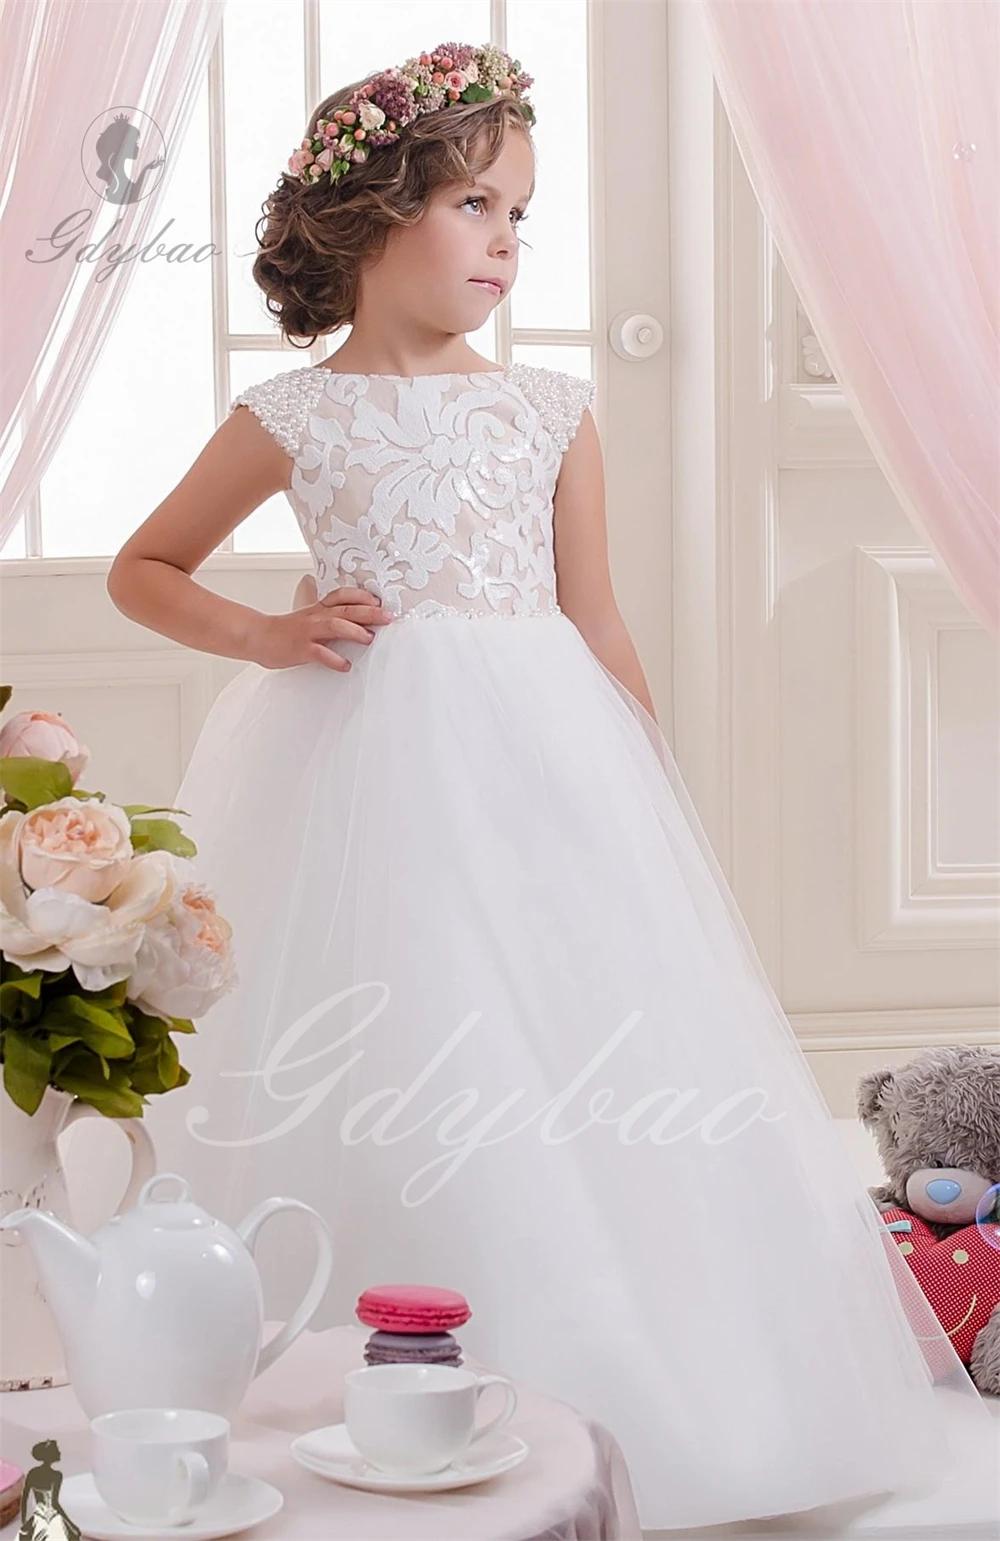 

Flower Girl Dress For Wedding Pearls White Lace Fluffy Applique Tulle Toddler Kids First Communion Ball Gowns Birthday Dress